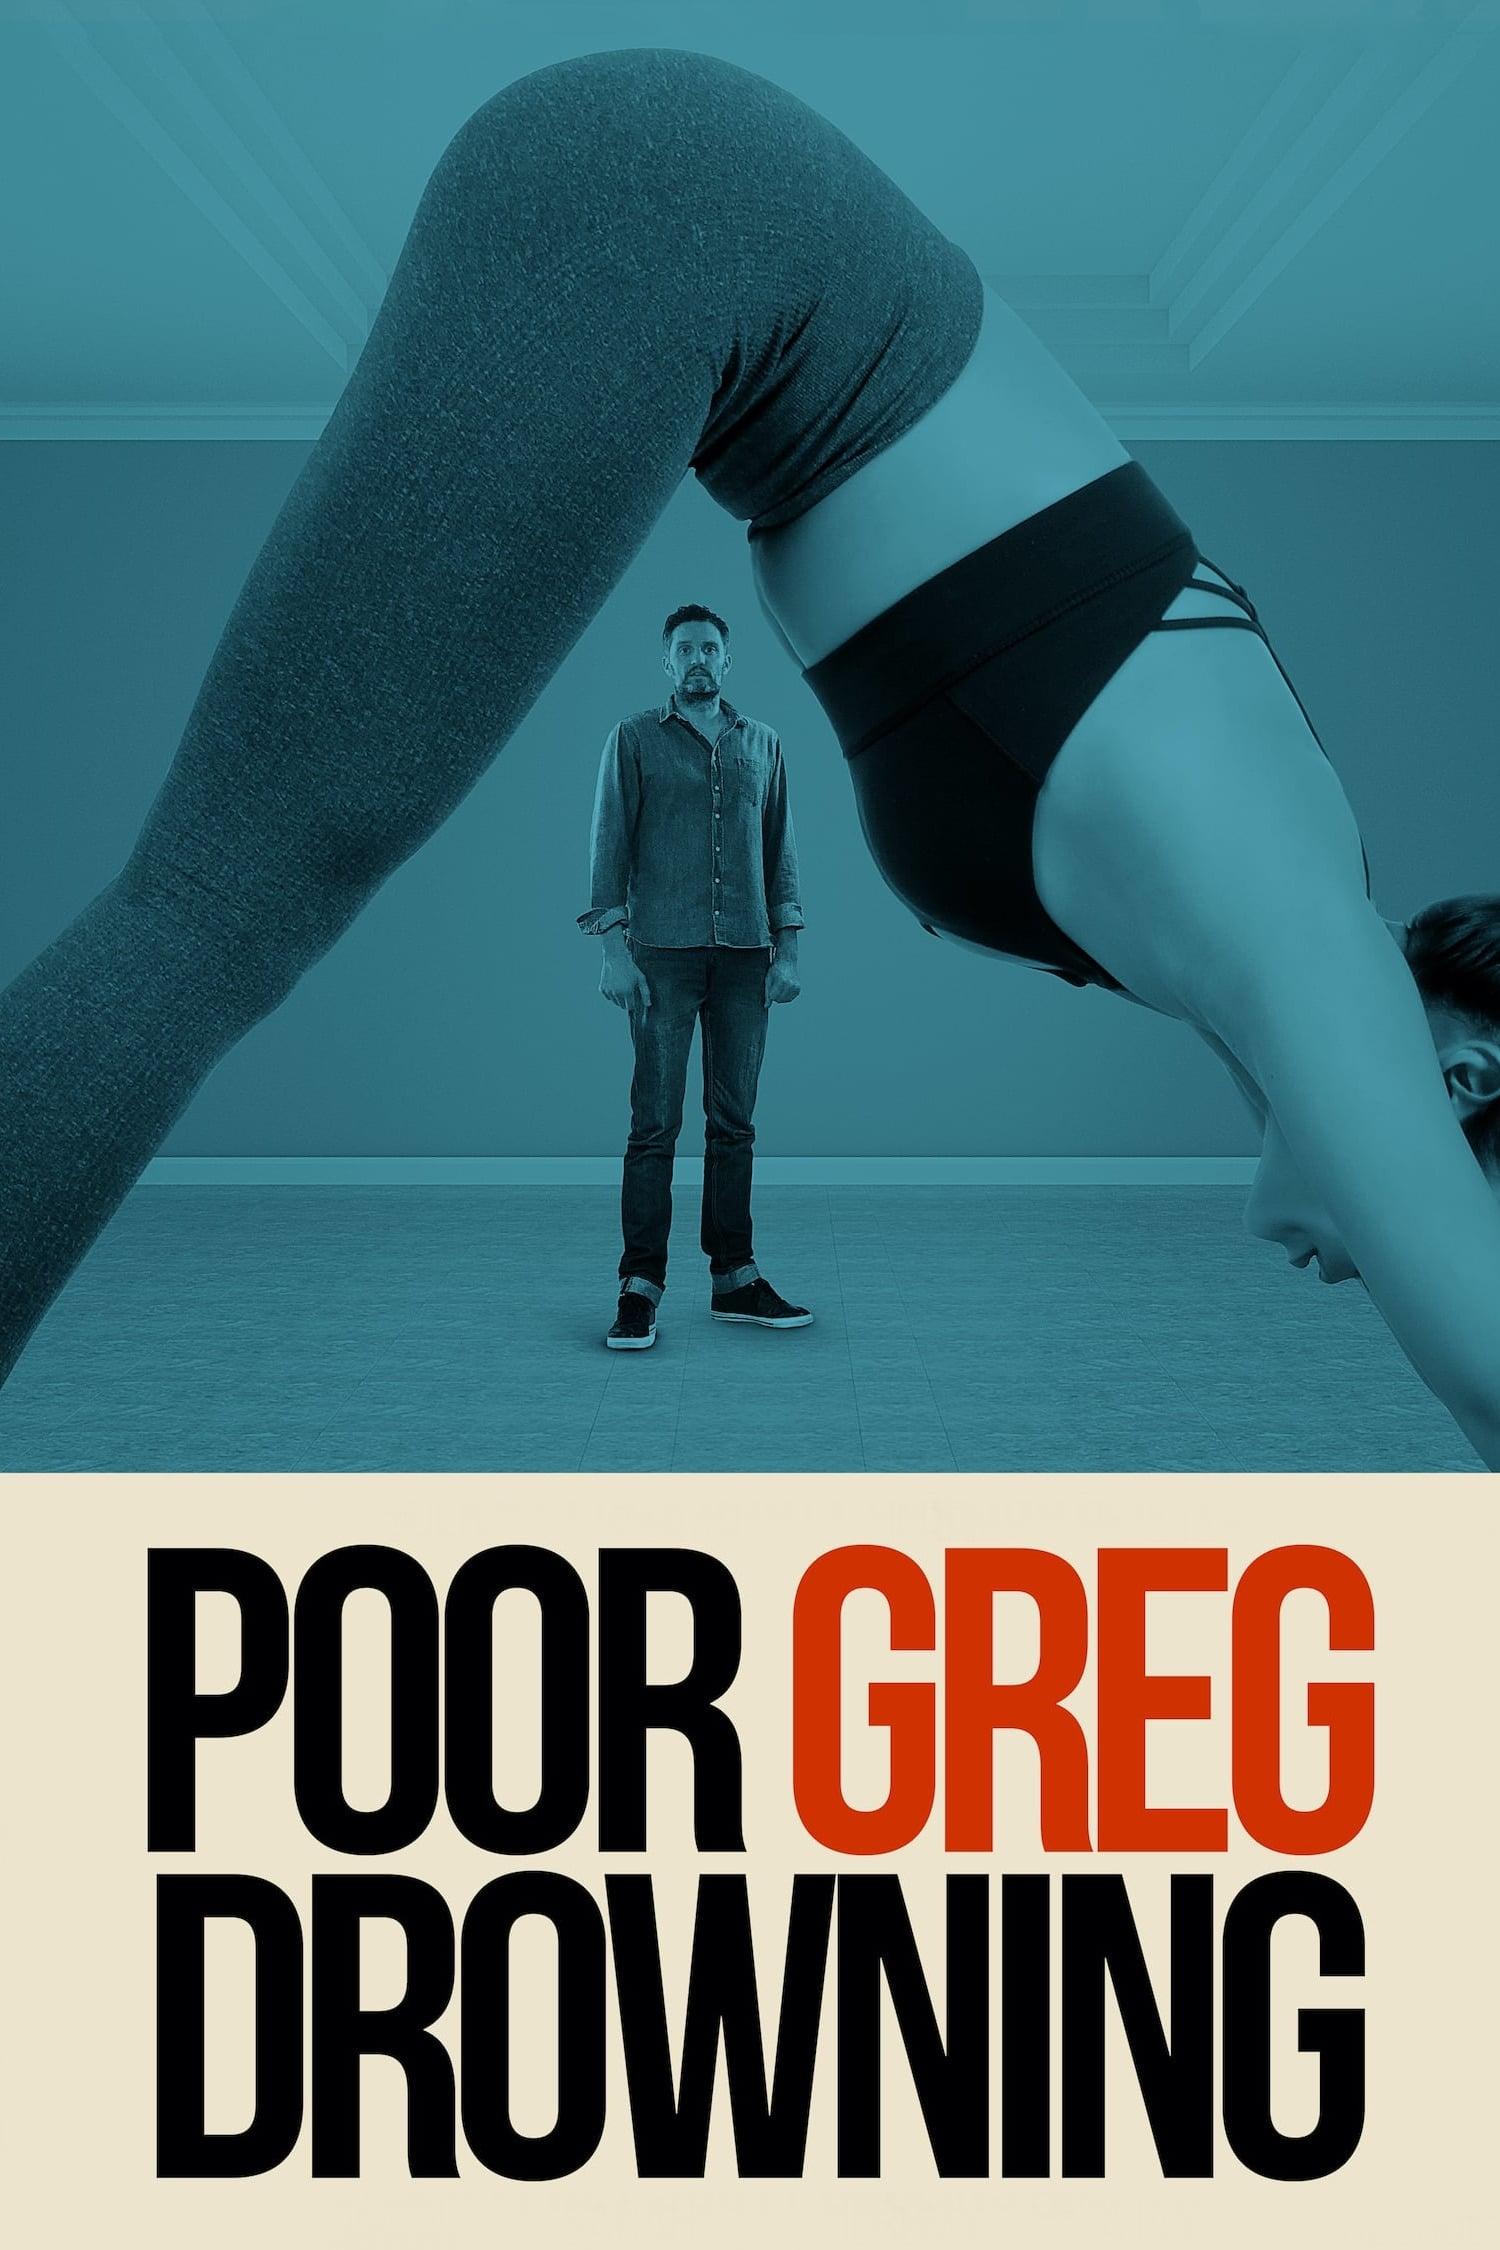 Poor Greg Drowning poster